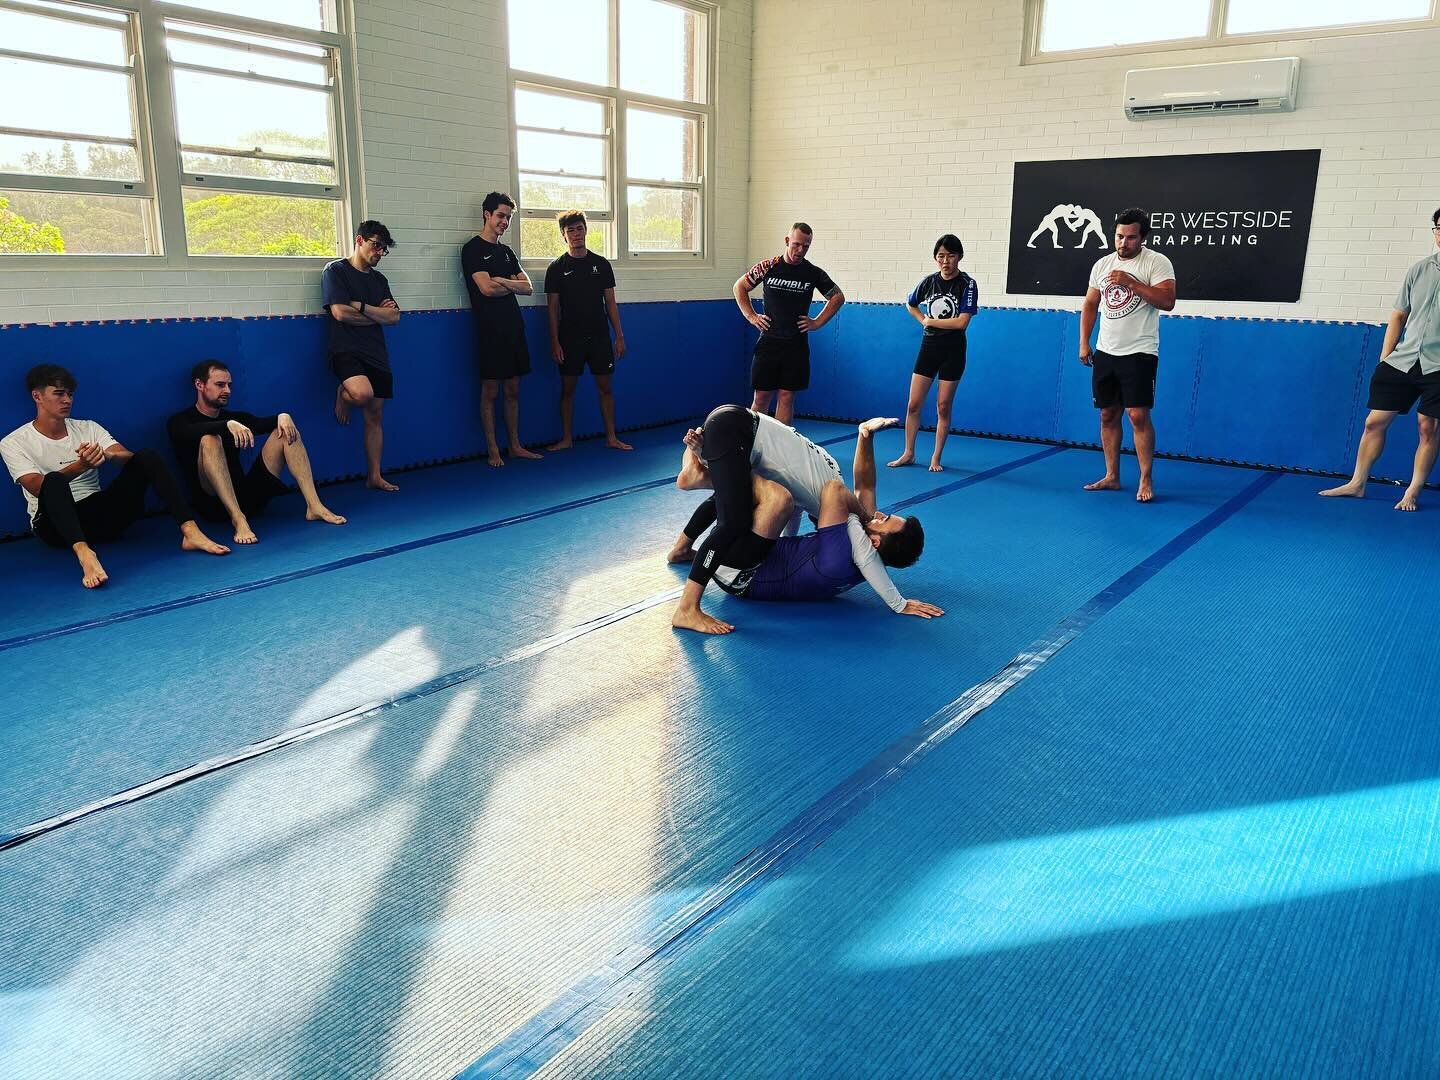 Monday night sweeps with coach Dan! We are open till the 23rd of December, come down for a free trial this week!